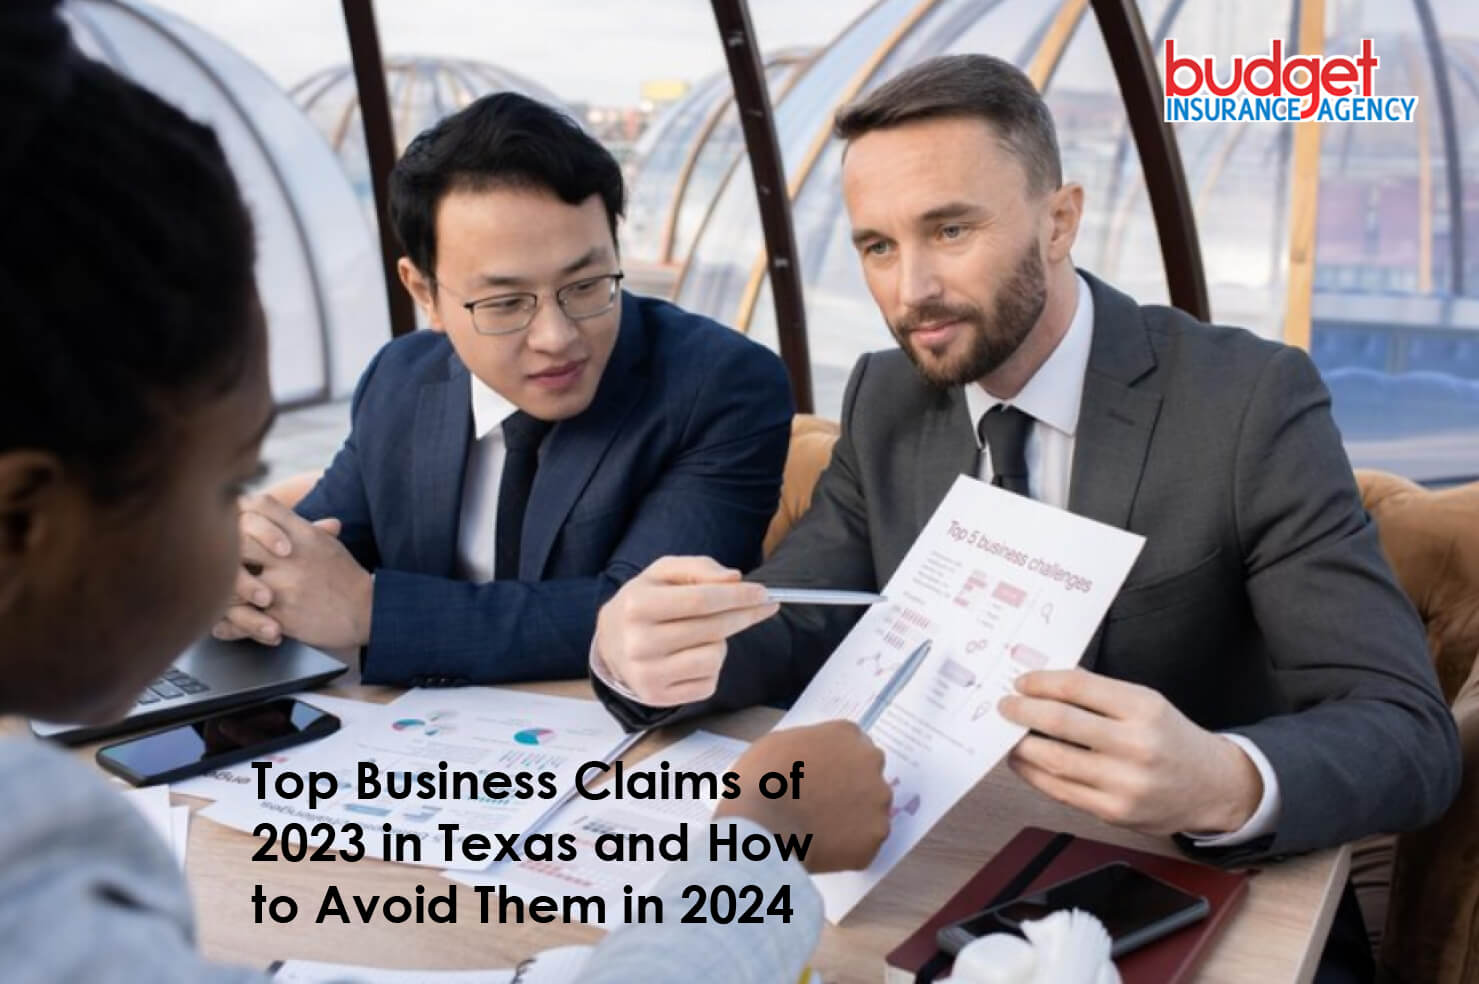 Top Business Claims of 2023 in Texas and How to Avoid Them in 2024